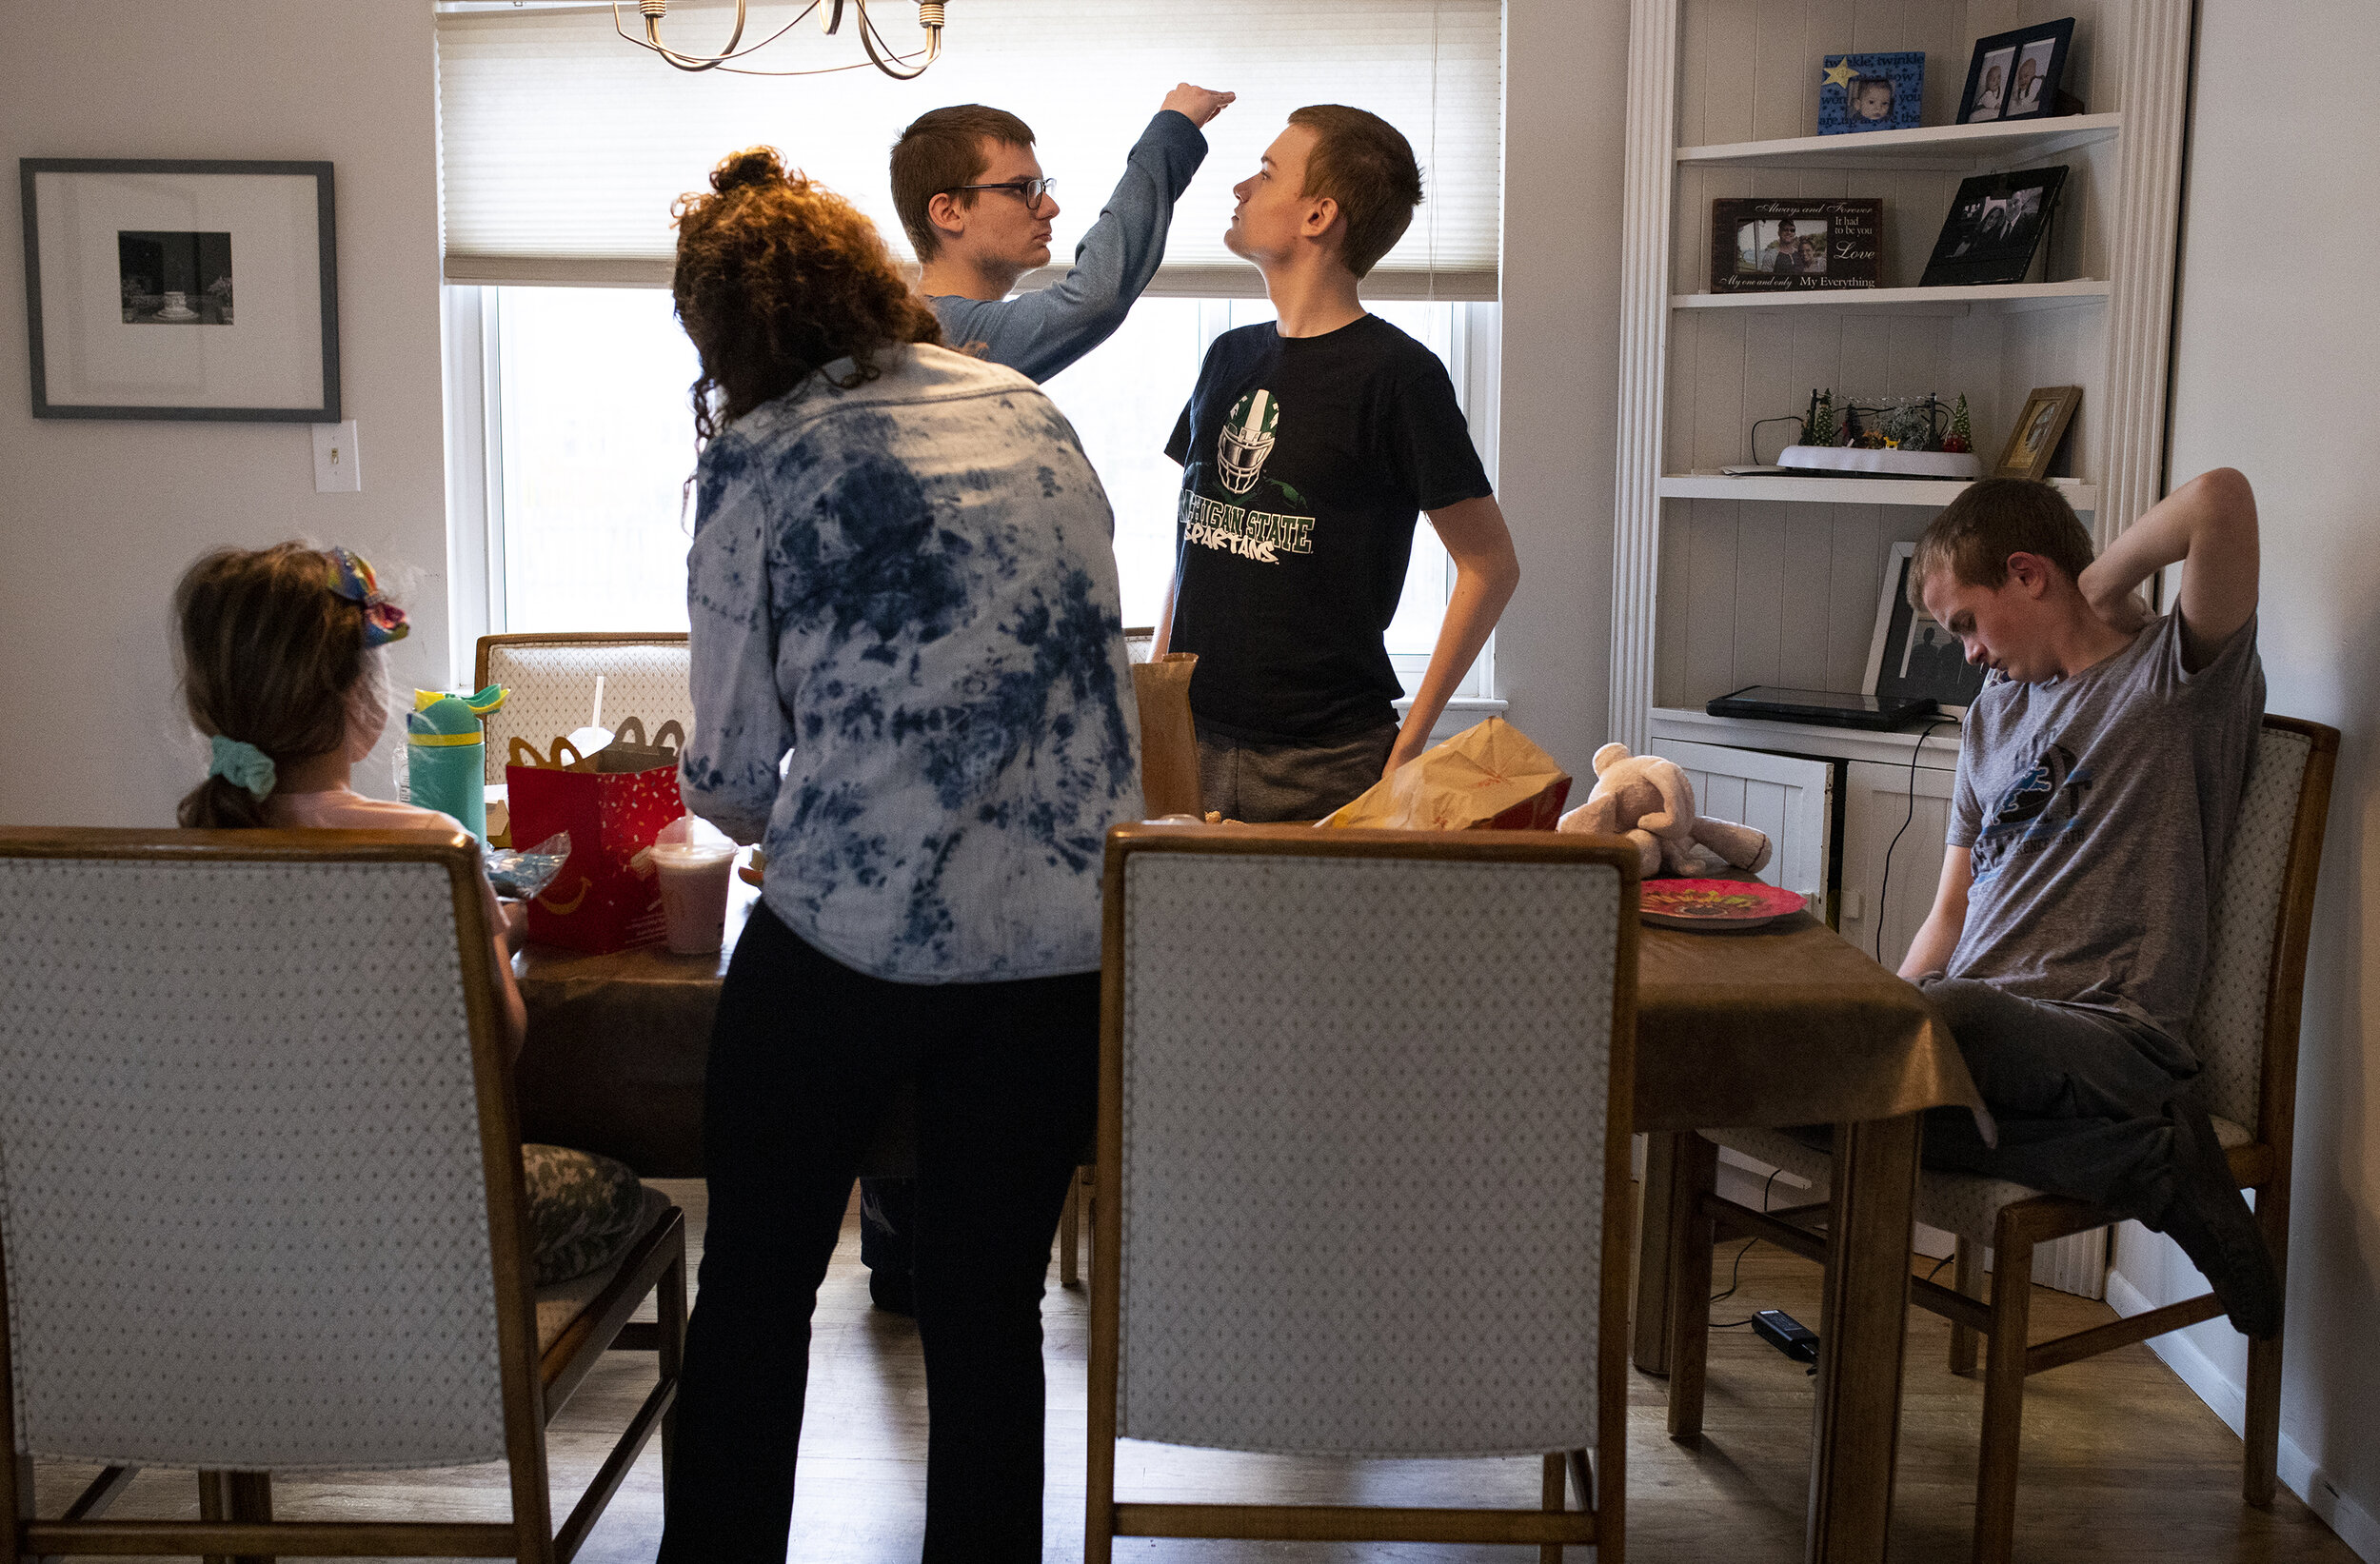  Andrew Carleton, middle left, measures his height against his younger brother Connor's, middle right, on Andrew's nineteenth birthday on Wednesday, March 10, 2021, in Troy. Andrew, Connor and their brother, Jackson, right, all require special needs.